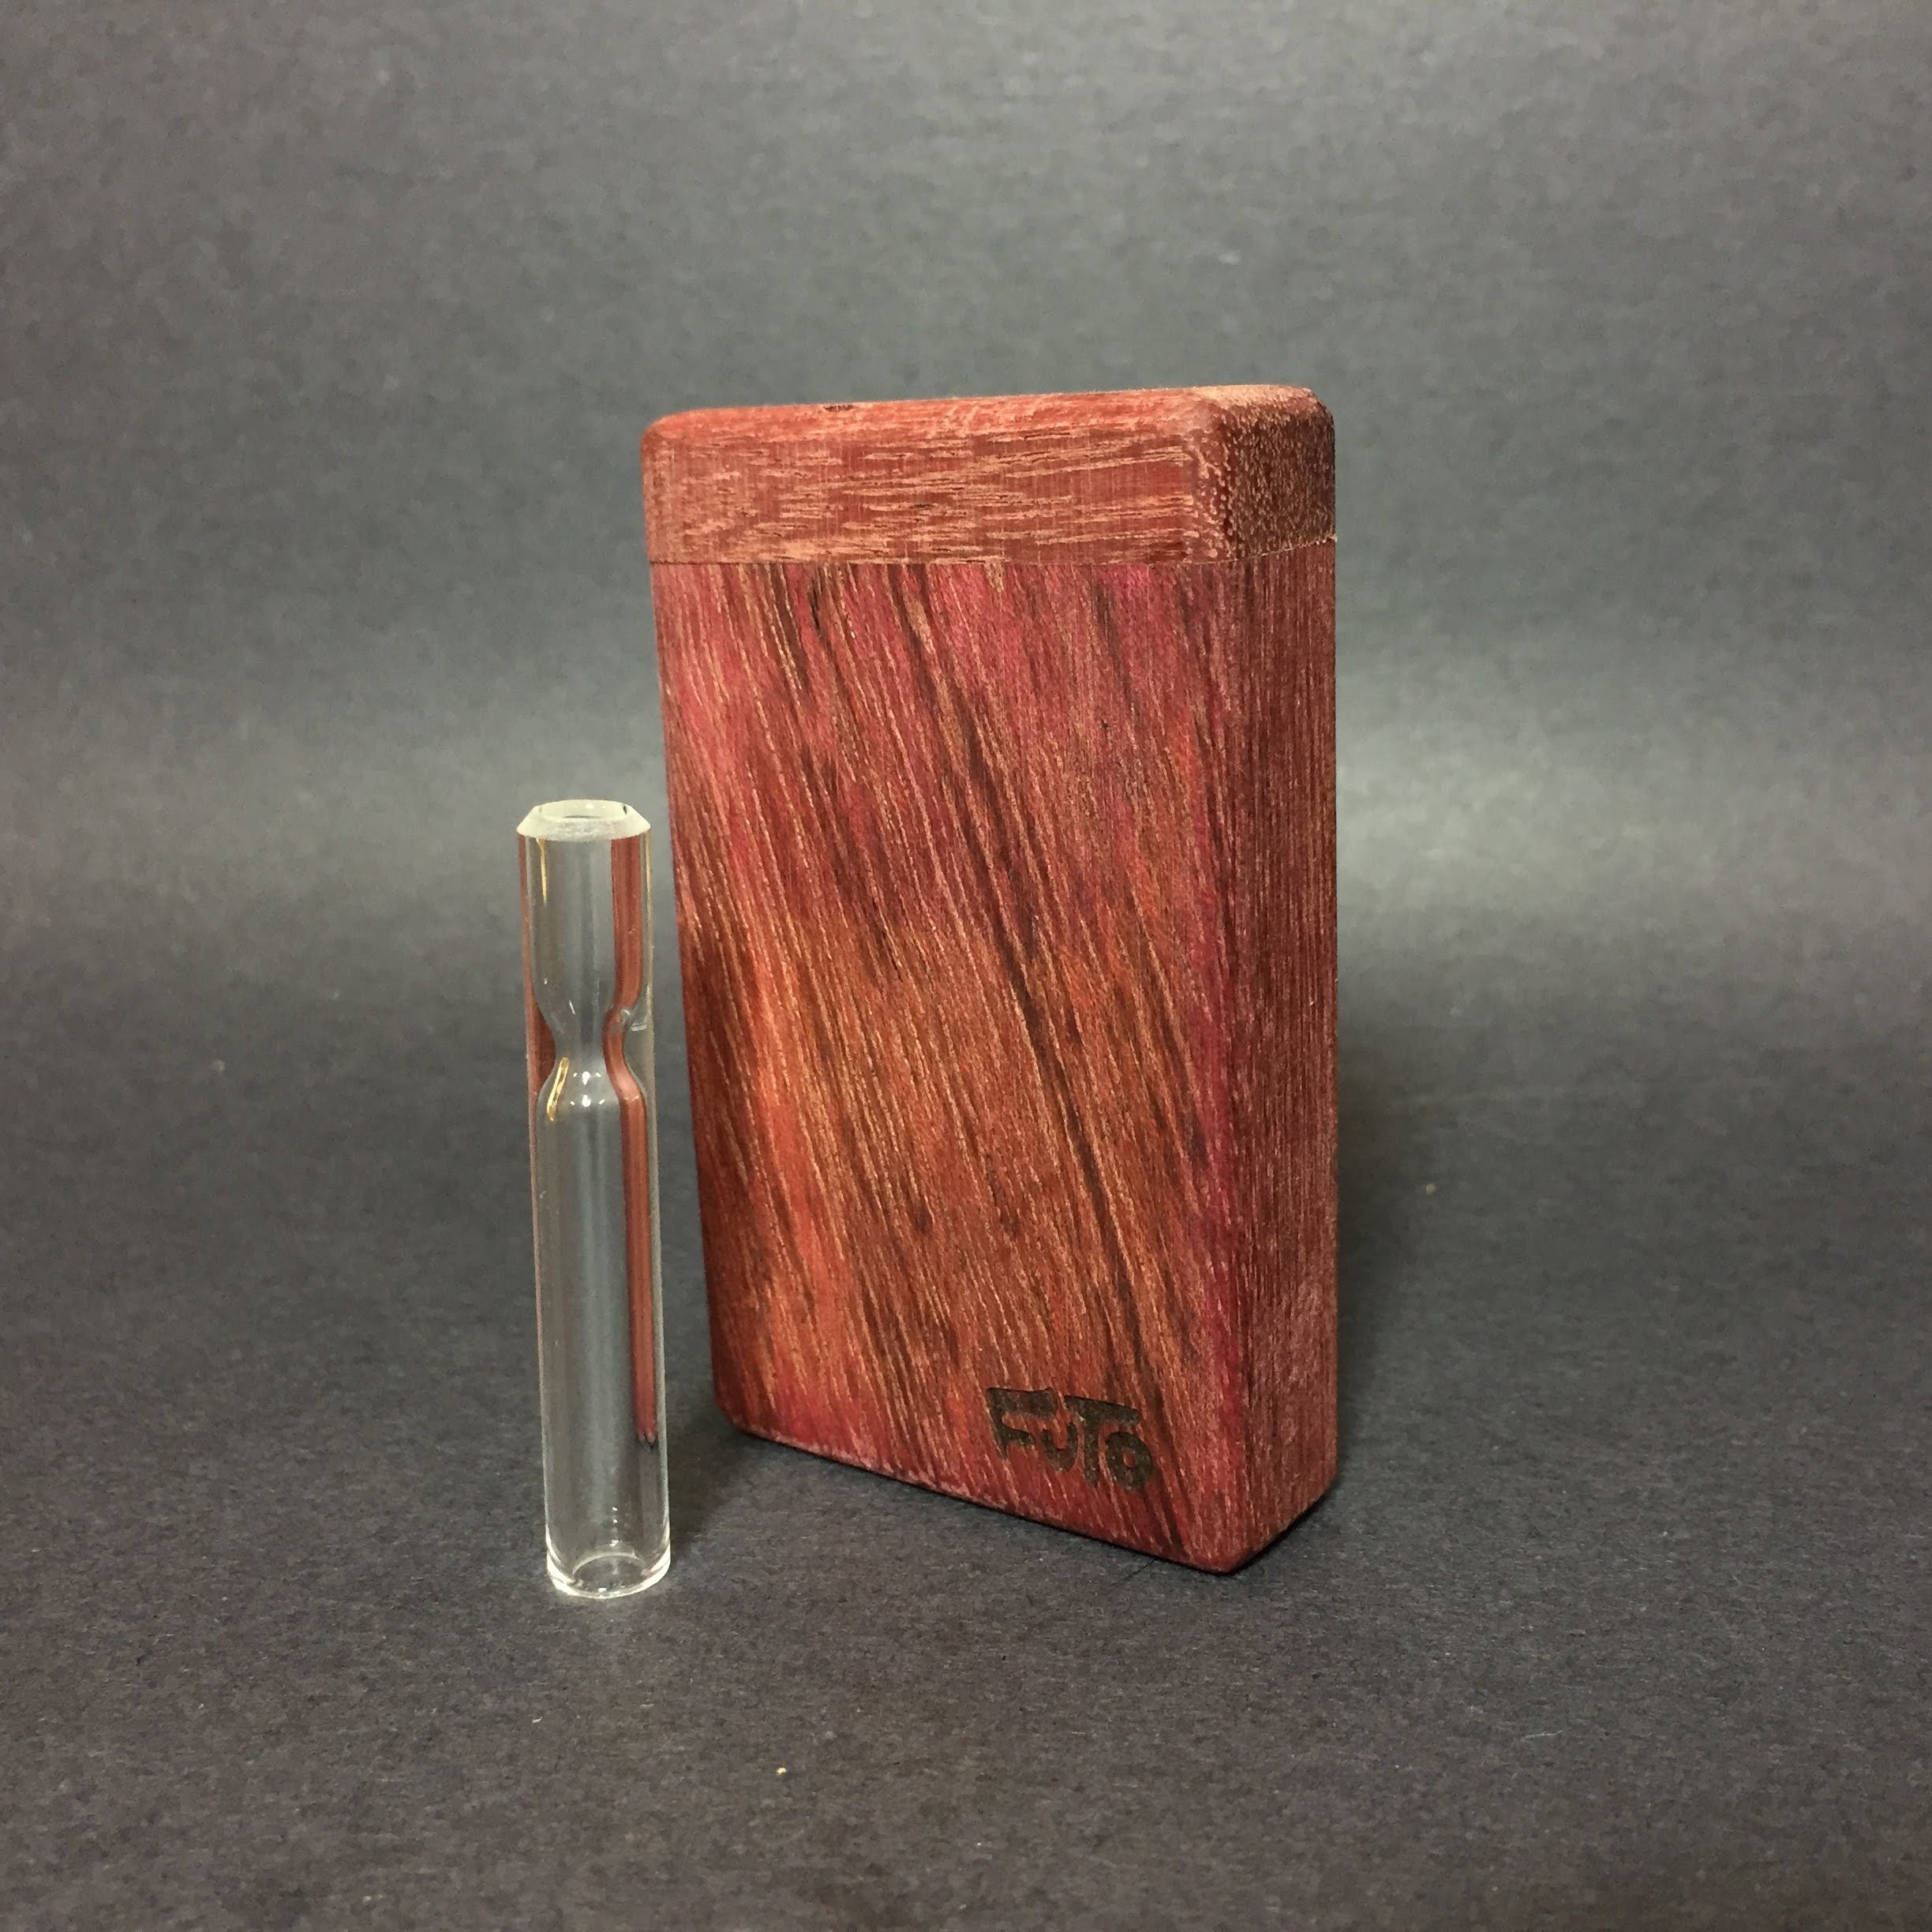 Squatch Dip Can One Hitter Dugout With Poker and FREE Aluminum One